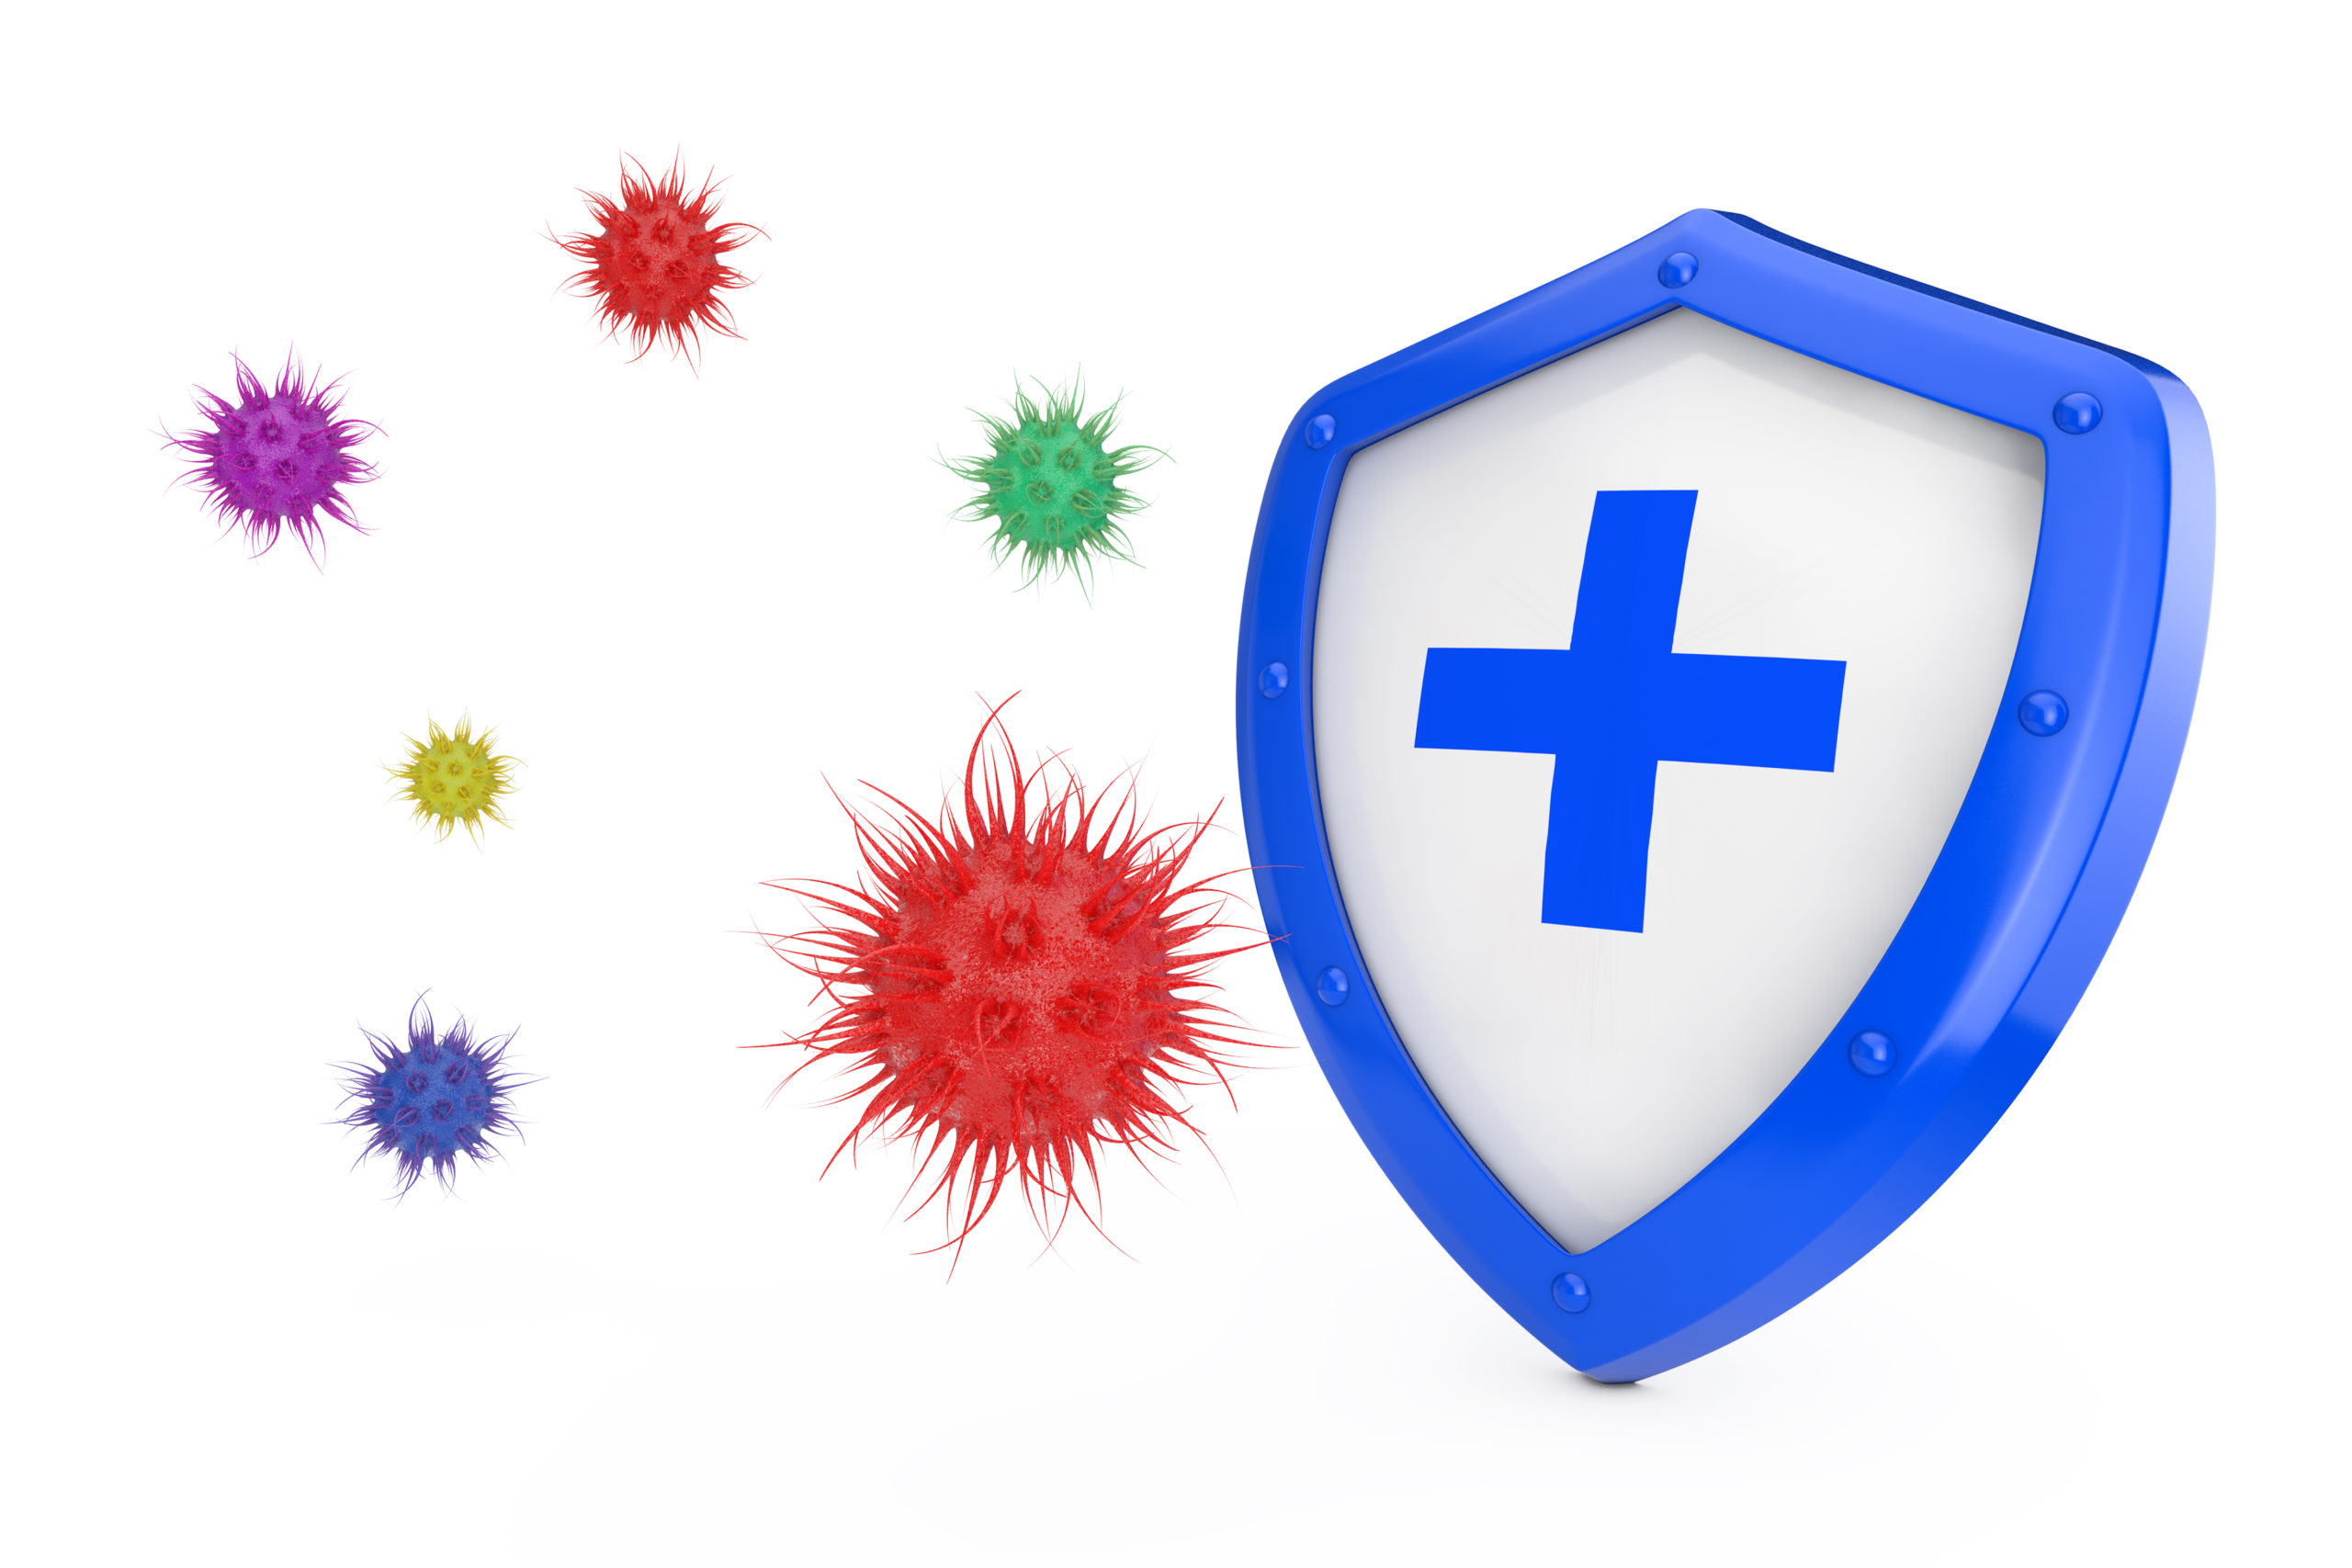 A blue and white shield against colourful bacteria/virus cells